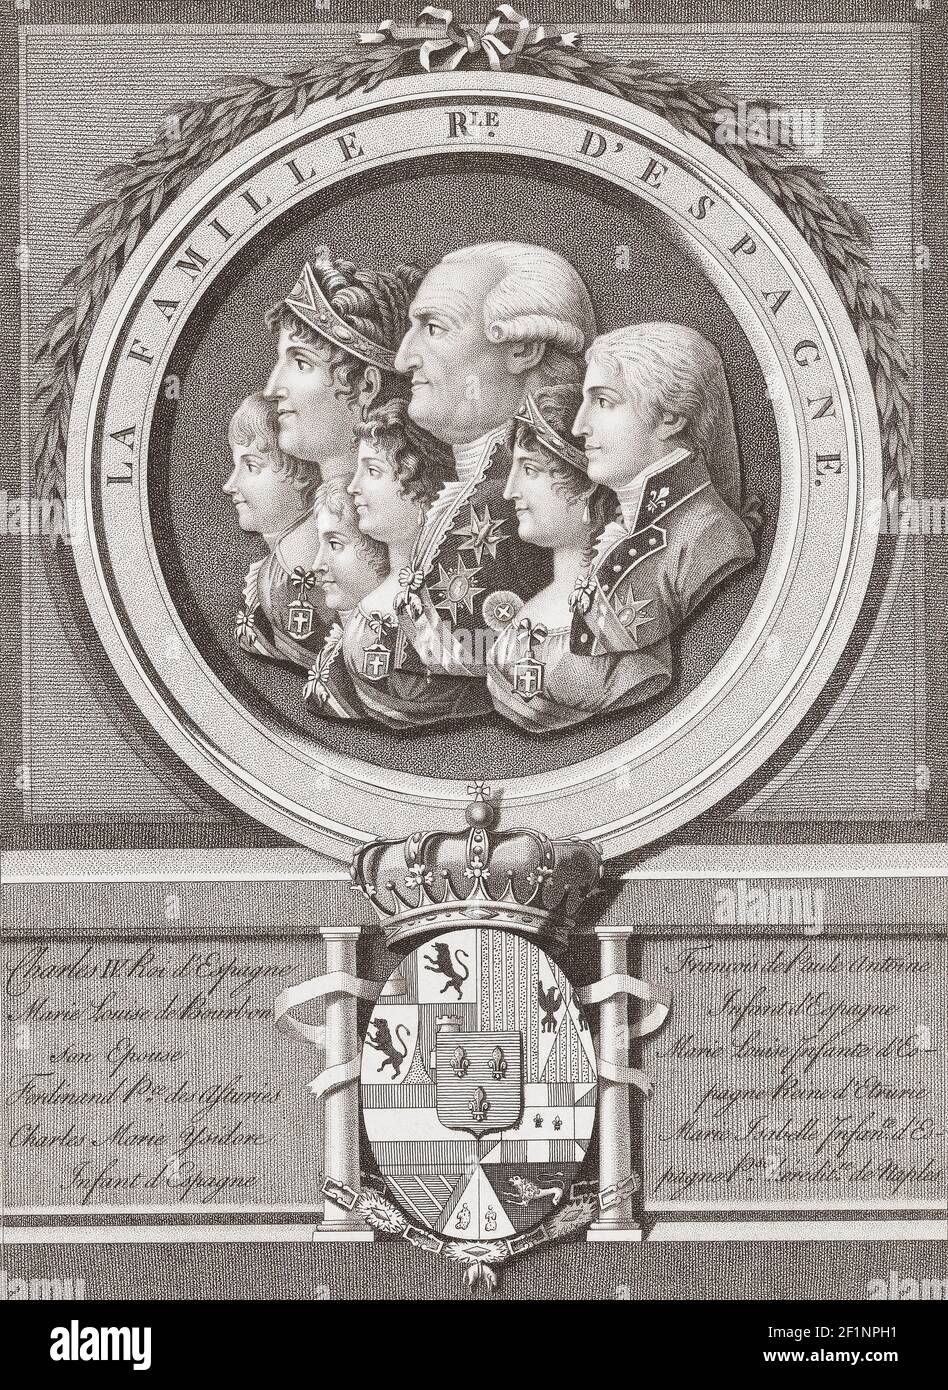 Carlos IV, King of Spain, with his wife Maria Luisa of Parma and their five children.  Carlos IV, 1748 - 1819.  Maria Luisa of Parma, 1751 - 1819.  From an early 19th century engraving by Antoine Cardon after a work by Richard Cosway. Stock Photo